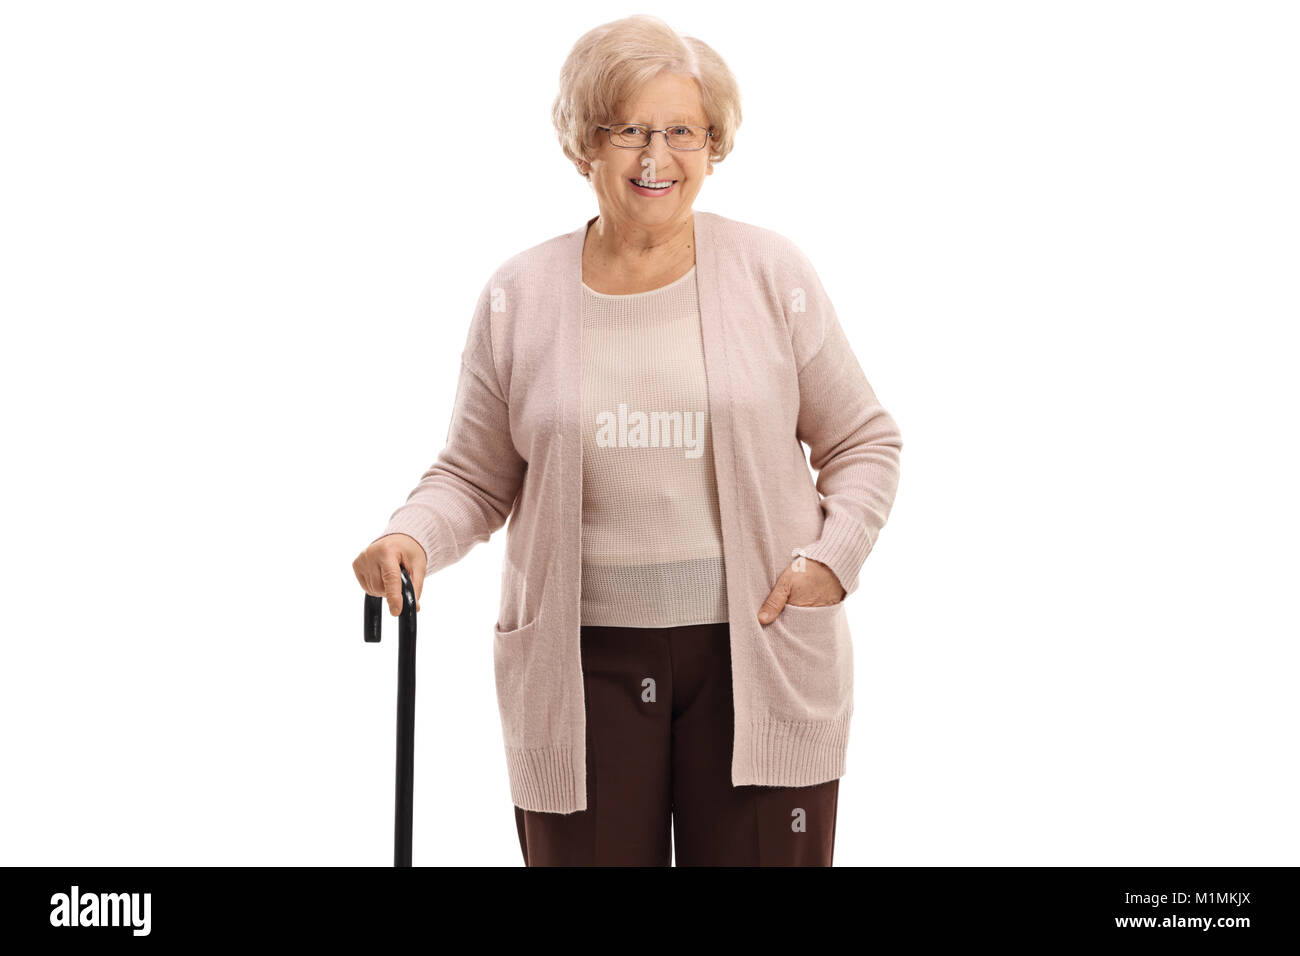 Elderly woman with a walking cane looking at the camera and smiling isolated on white background Stock Photo